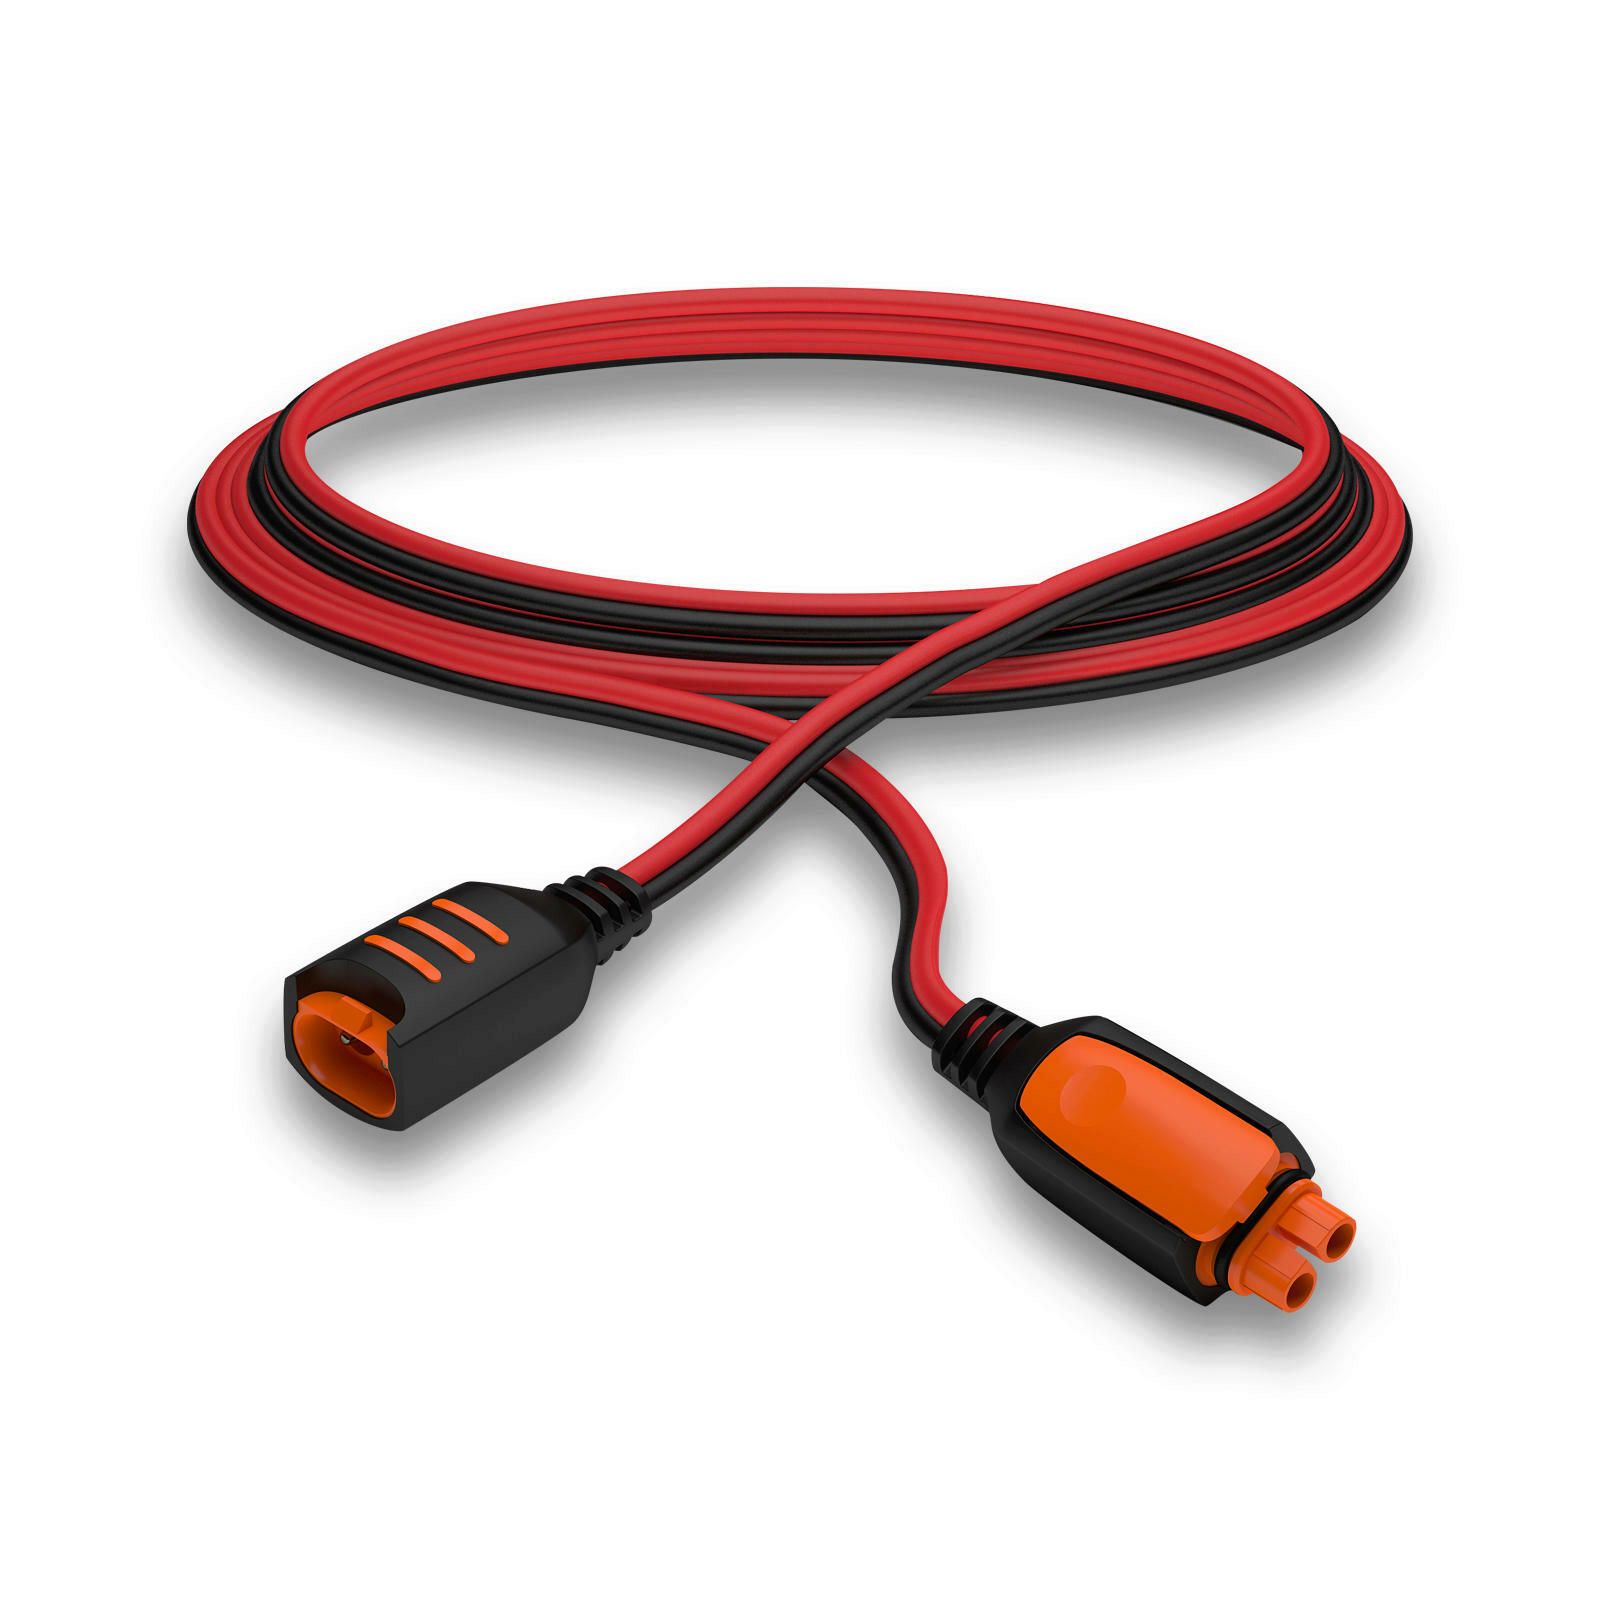 CONNECT 2.5M EXTENSION CABLE